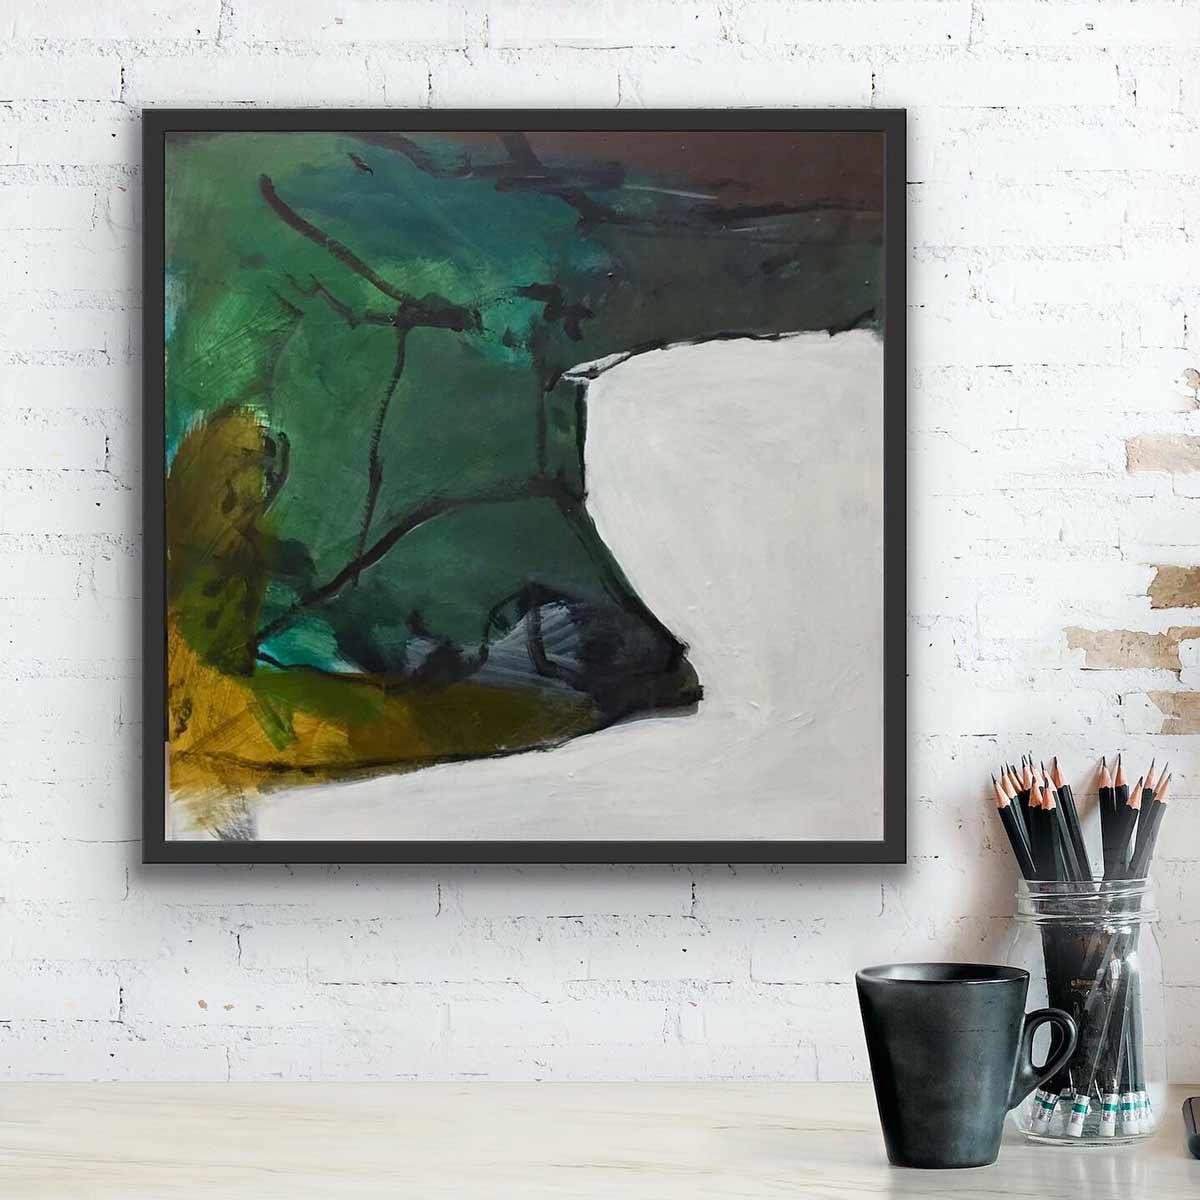 An abstract acrylic painting on board of expressive contoured forms and lines of pastures in green, brown, gold black line details on a cream background and hung on a white brick wall.